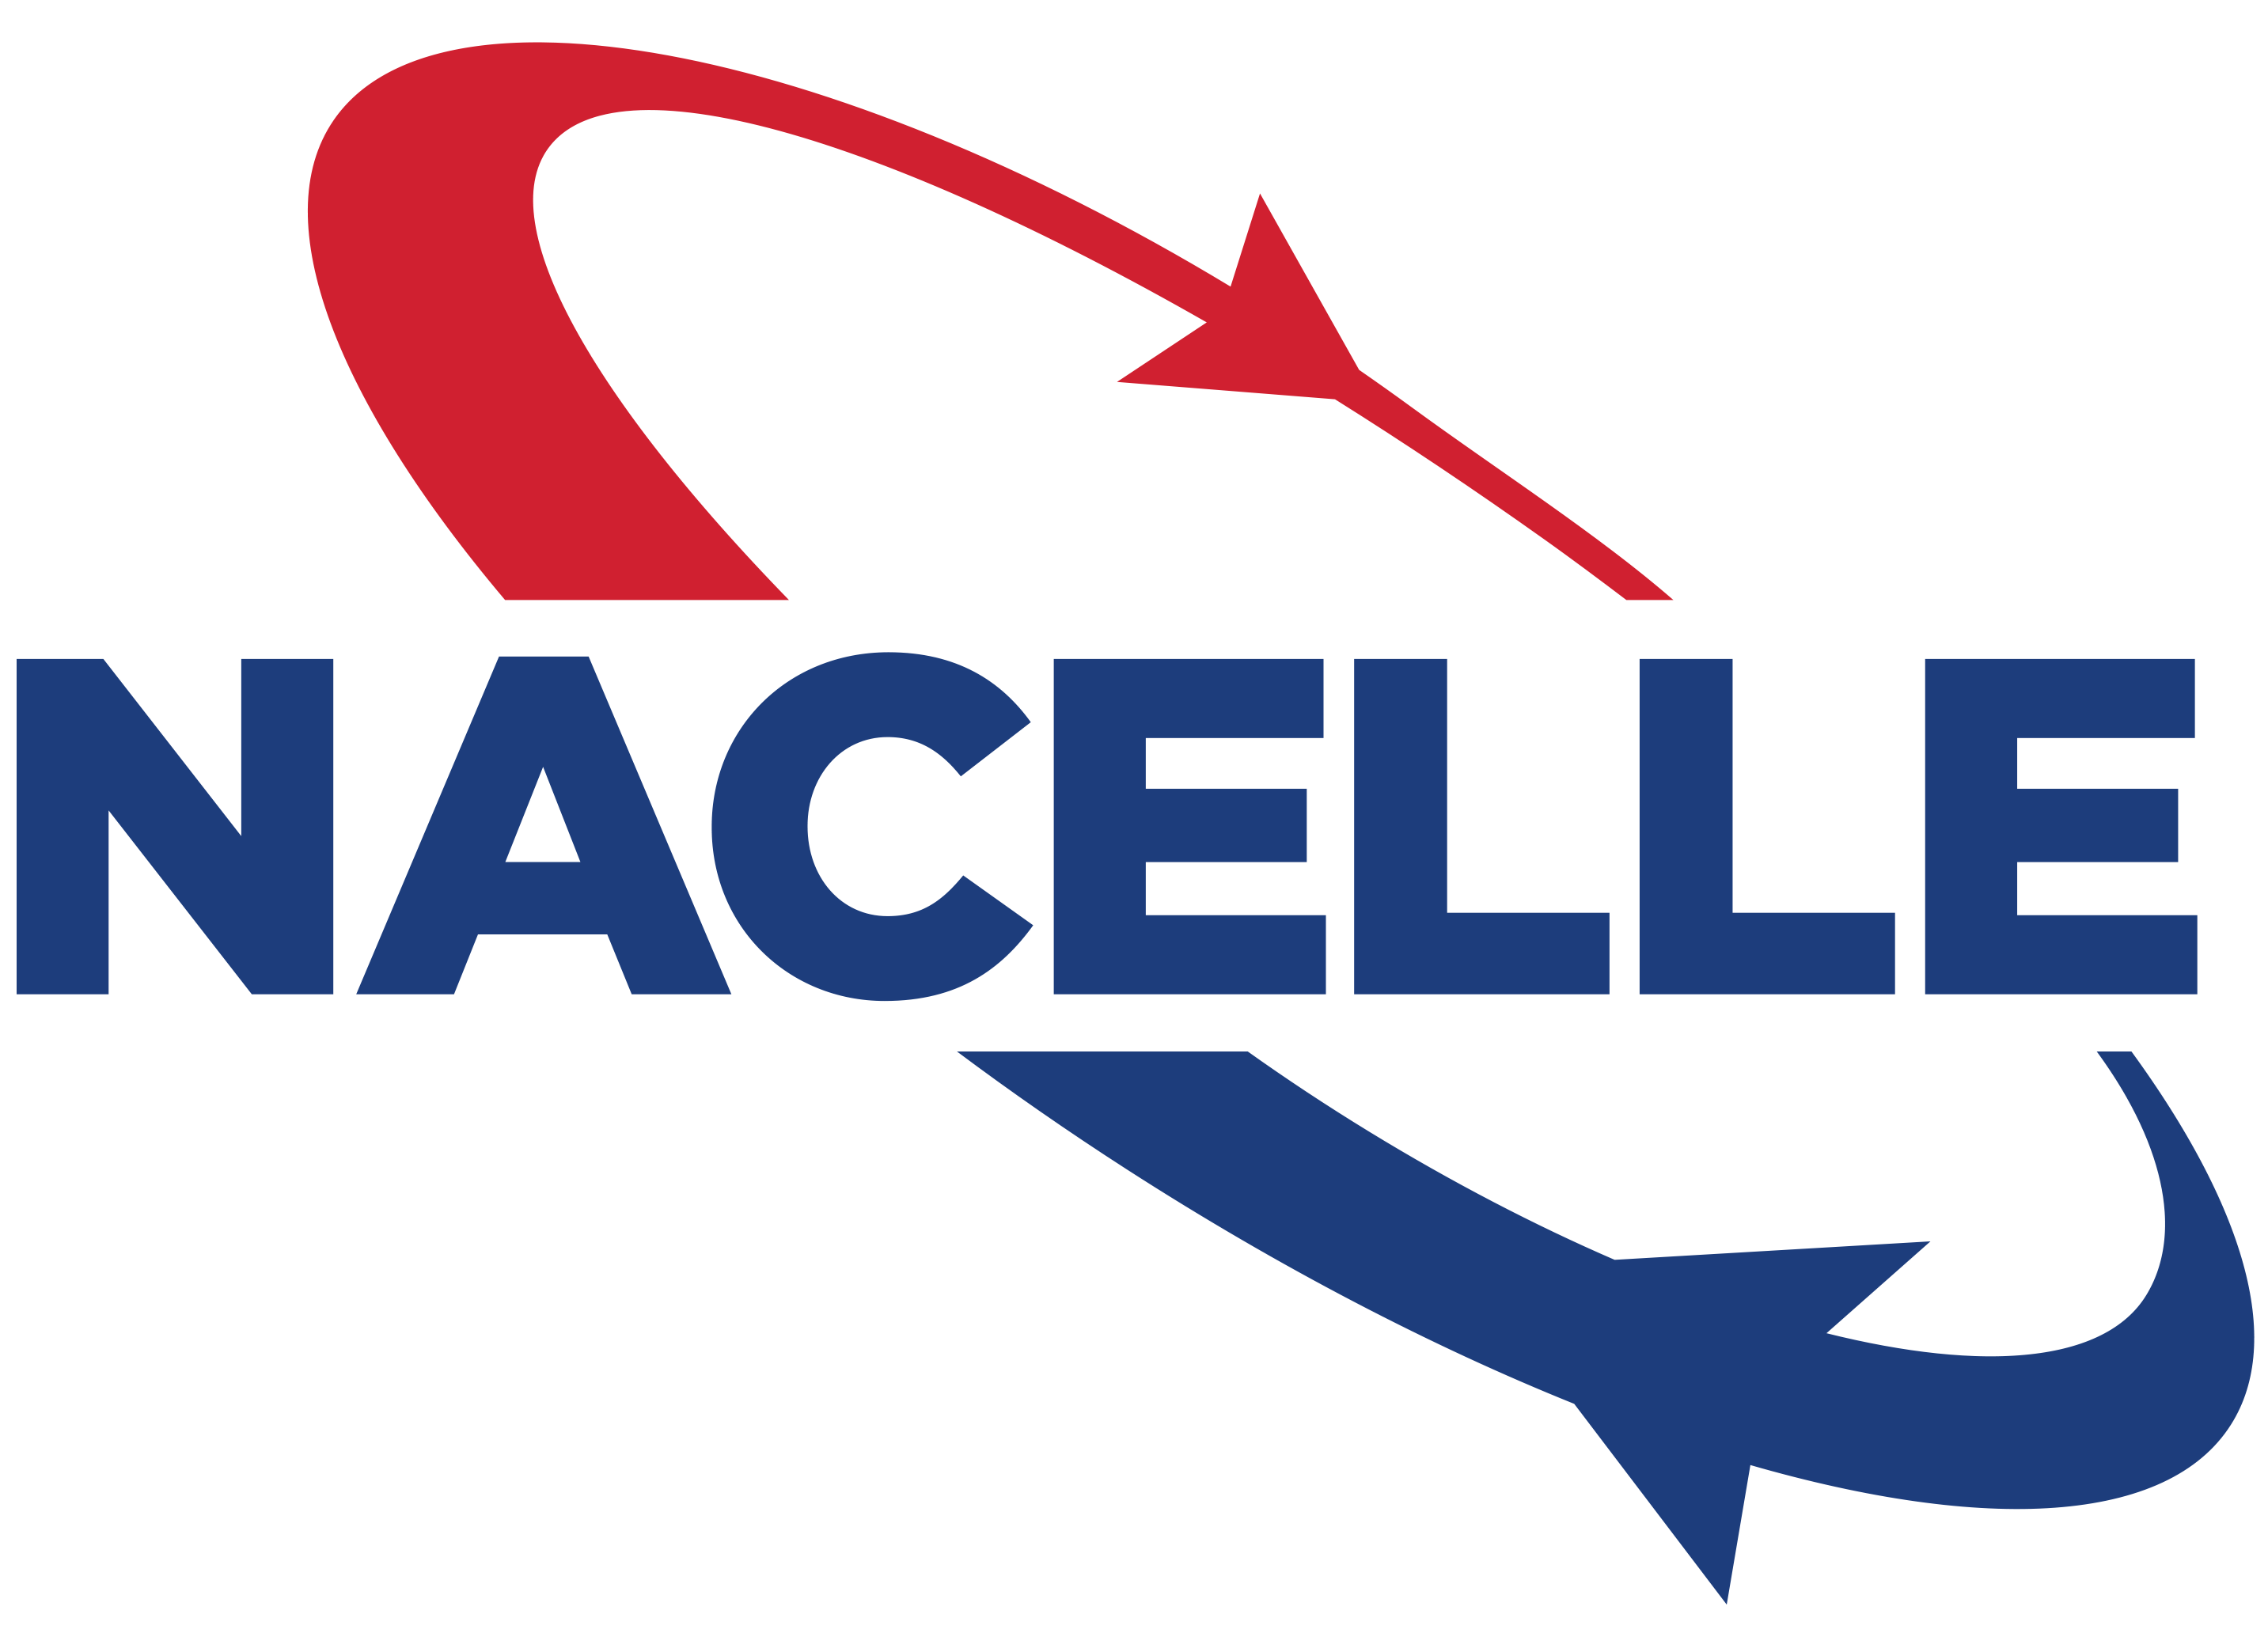 Nacelle Solutions